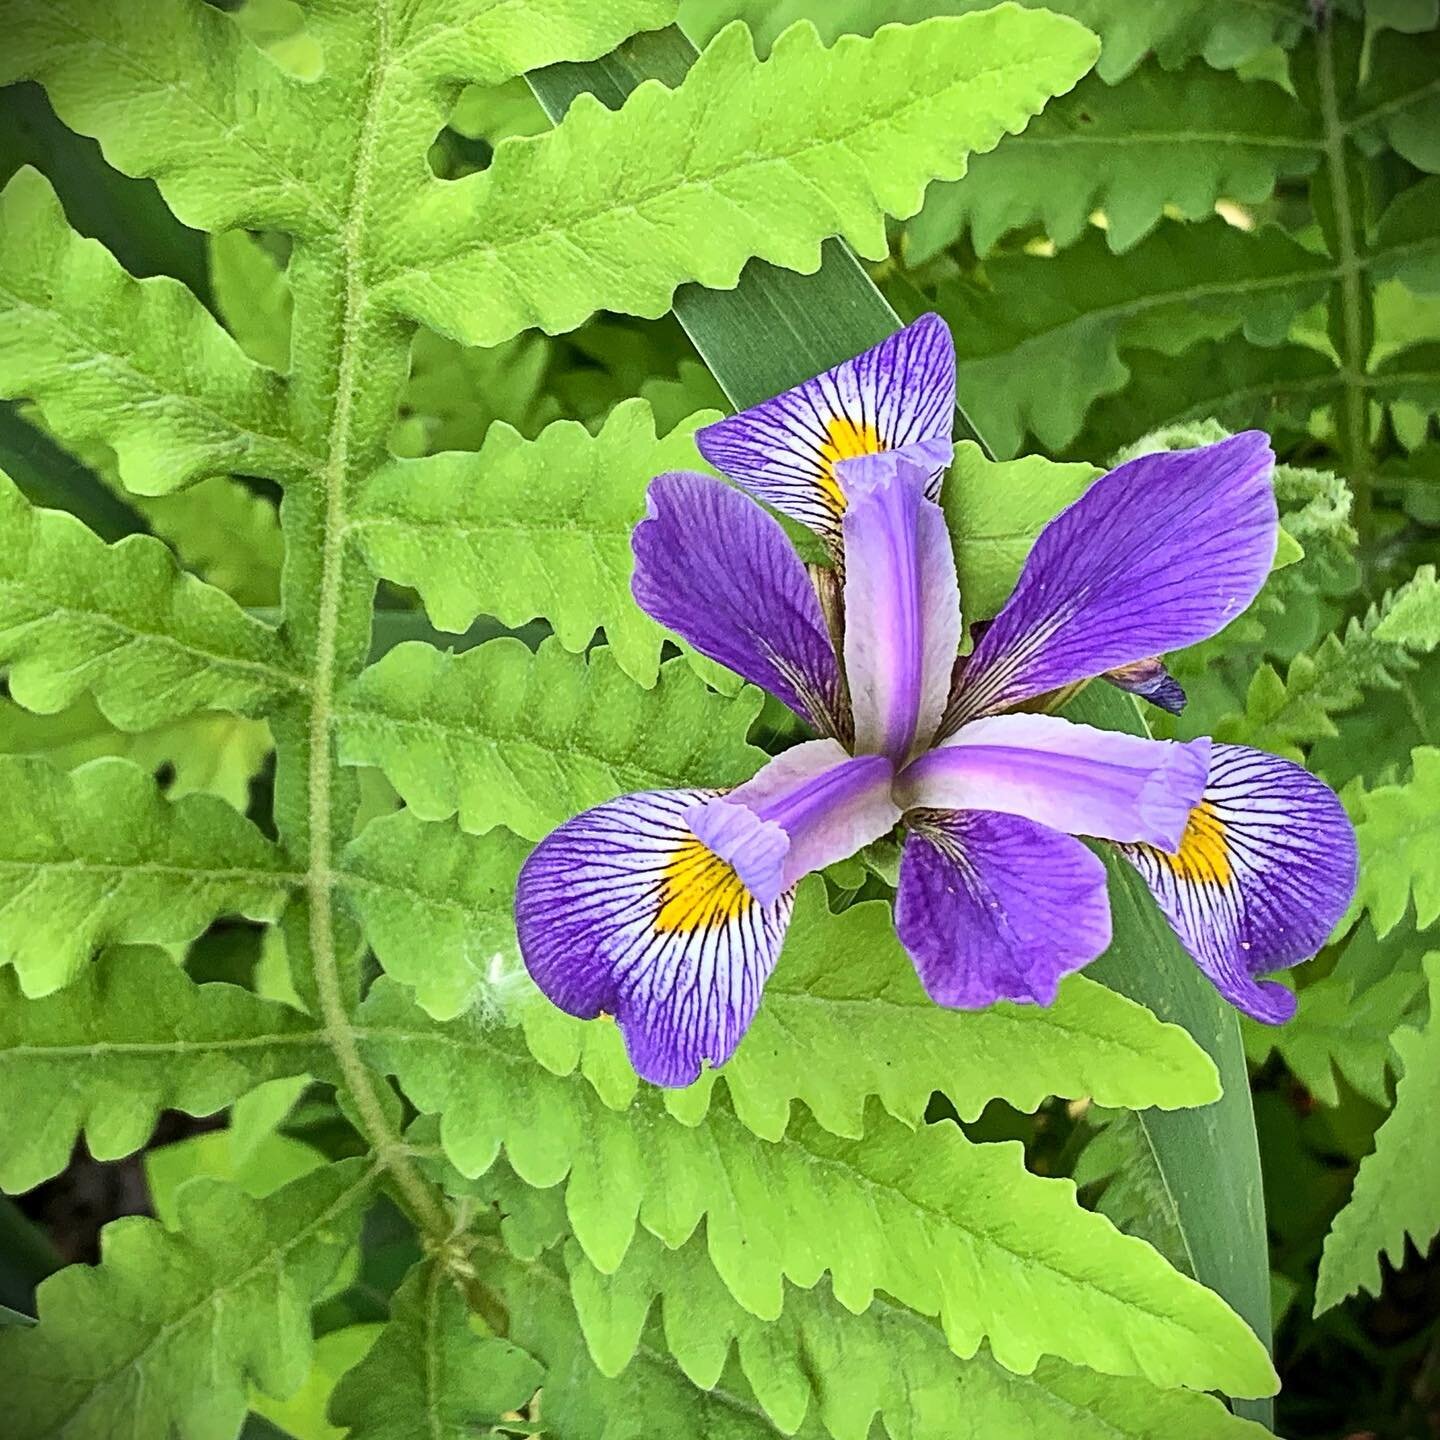 💜💛💚 Southern blue flag iris &amp; sensitive fern inhabiting the @OaklandU Biological Preserve. 

This summer we&rsquo;re restoring a 10 acre prairie fen habitat, in collaboration with the Tiegs Lab. In April, we conducted a prescribed burn &amp; n